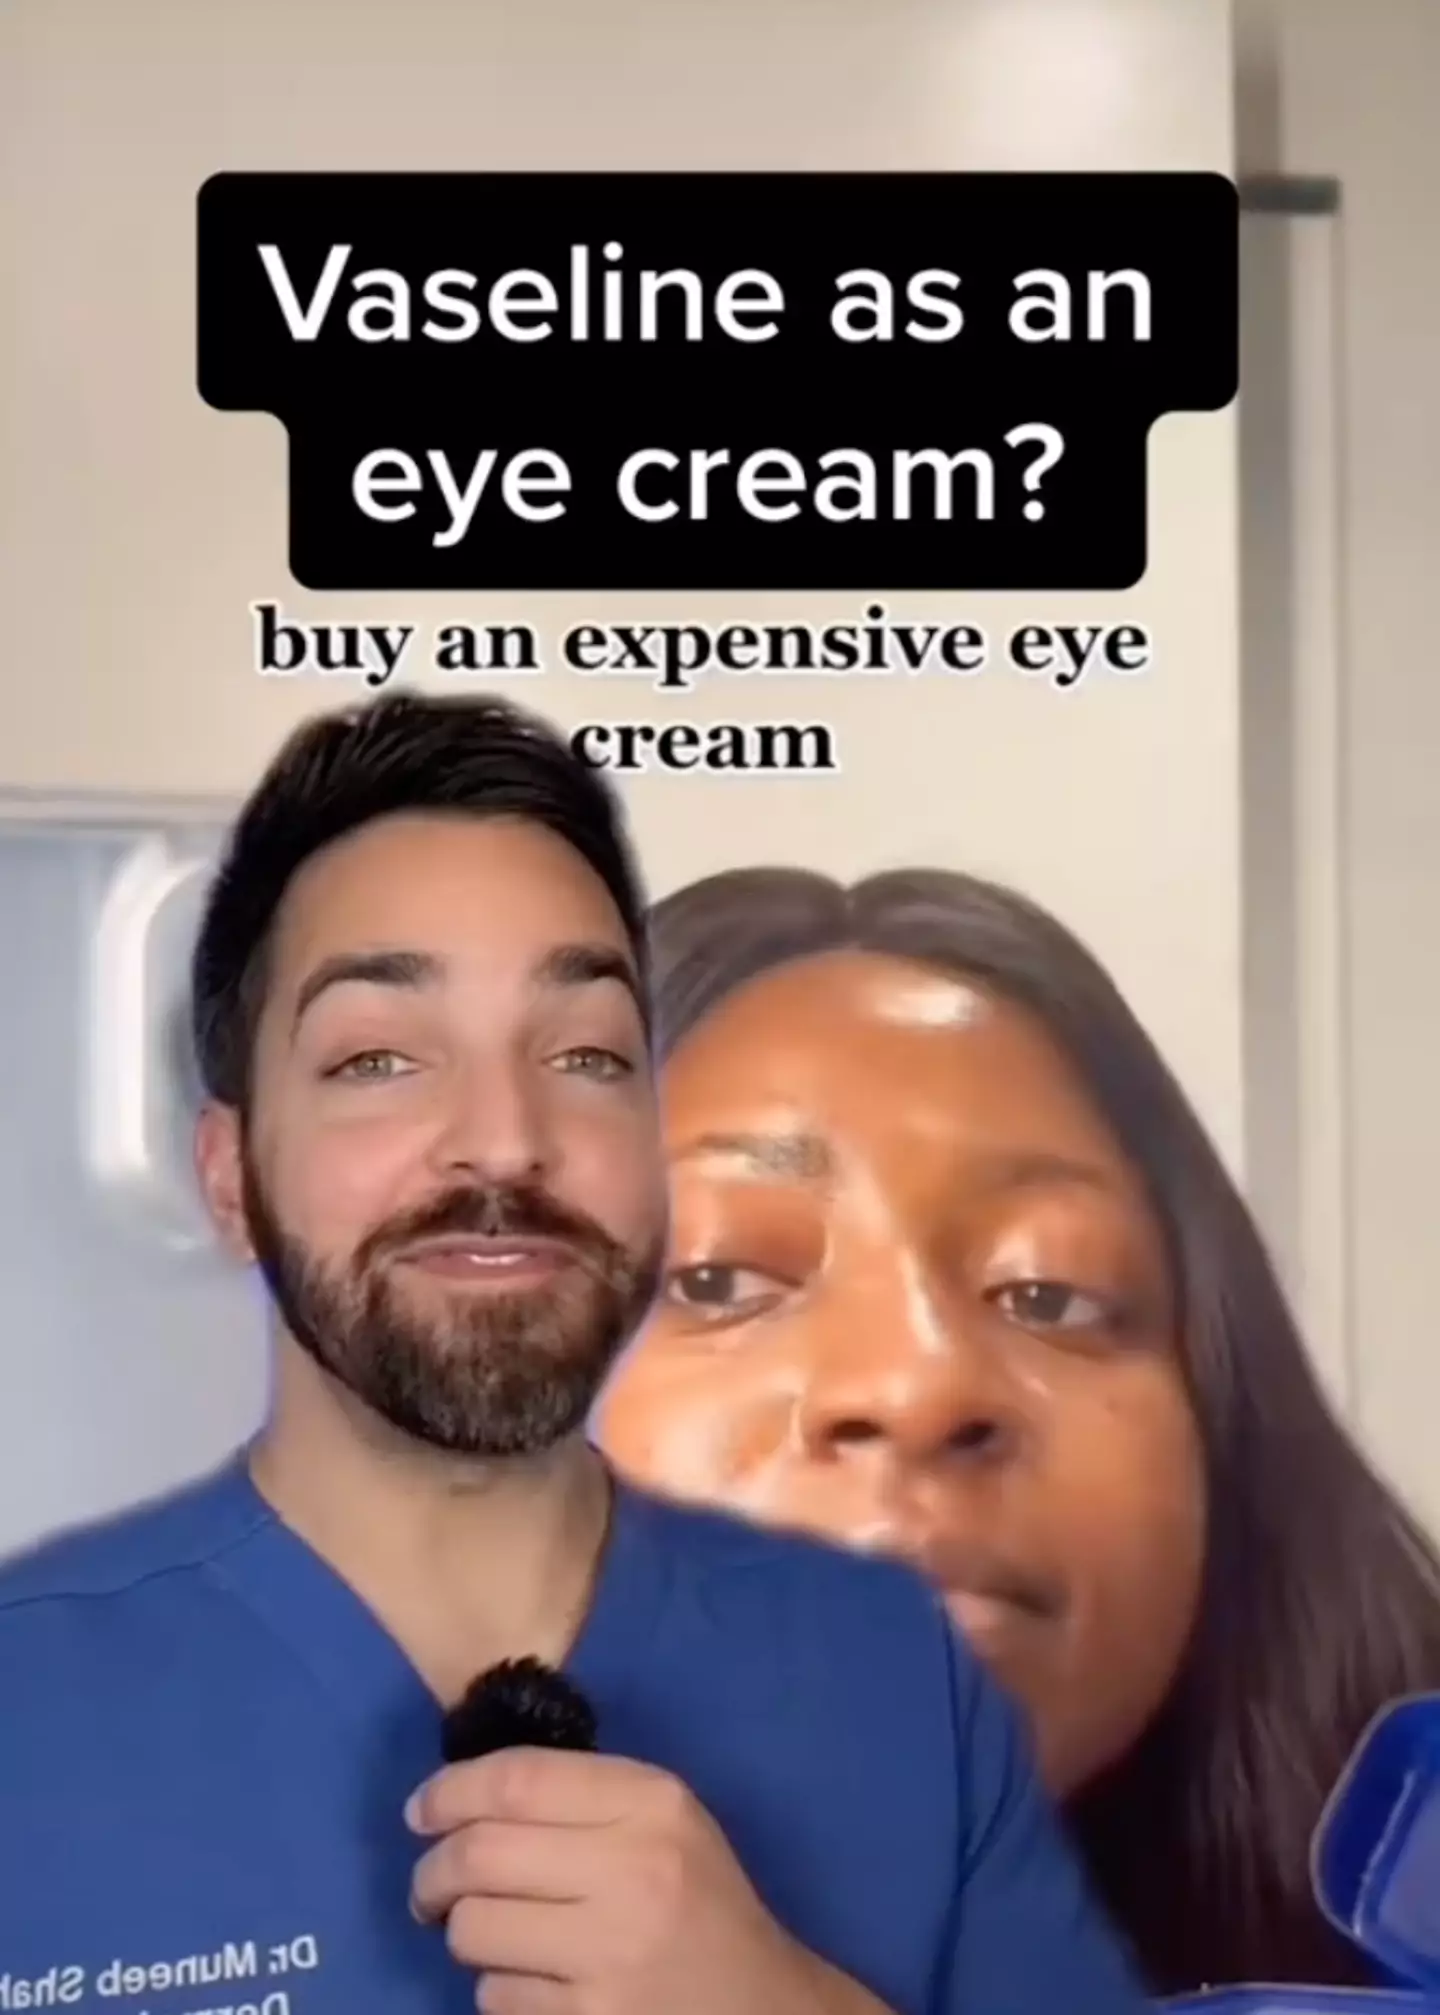 Should you swap your spenny eye cream for Vaseline?